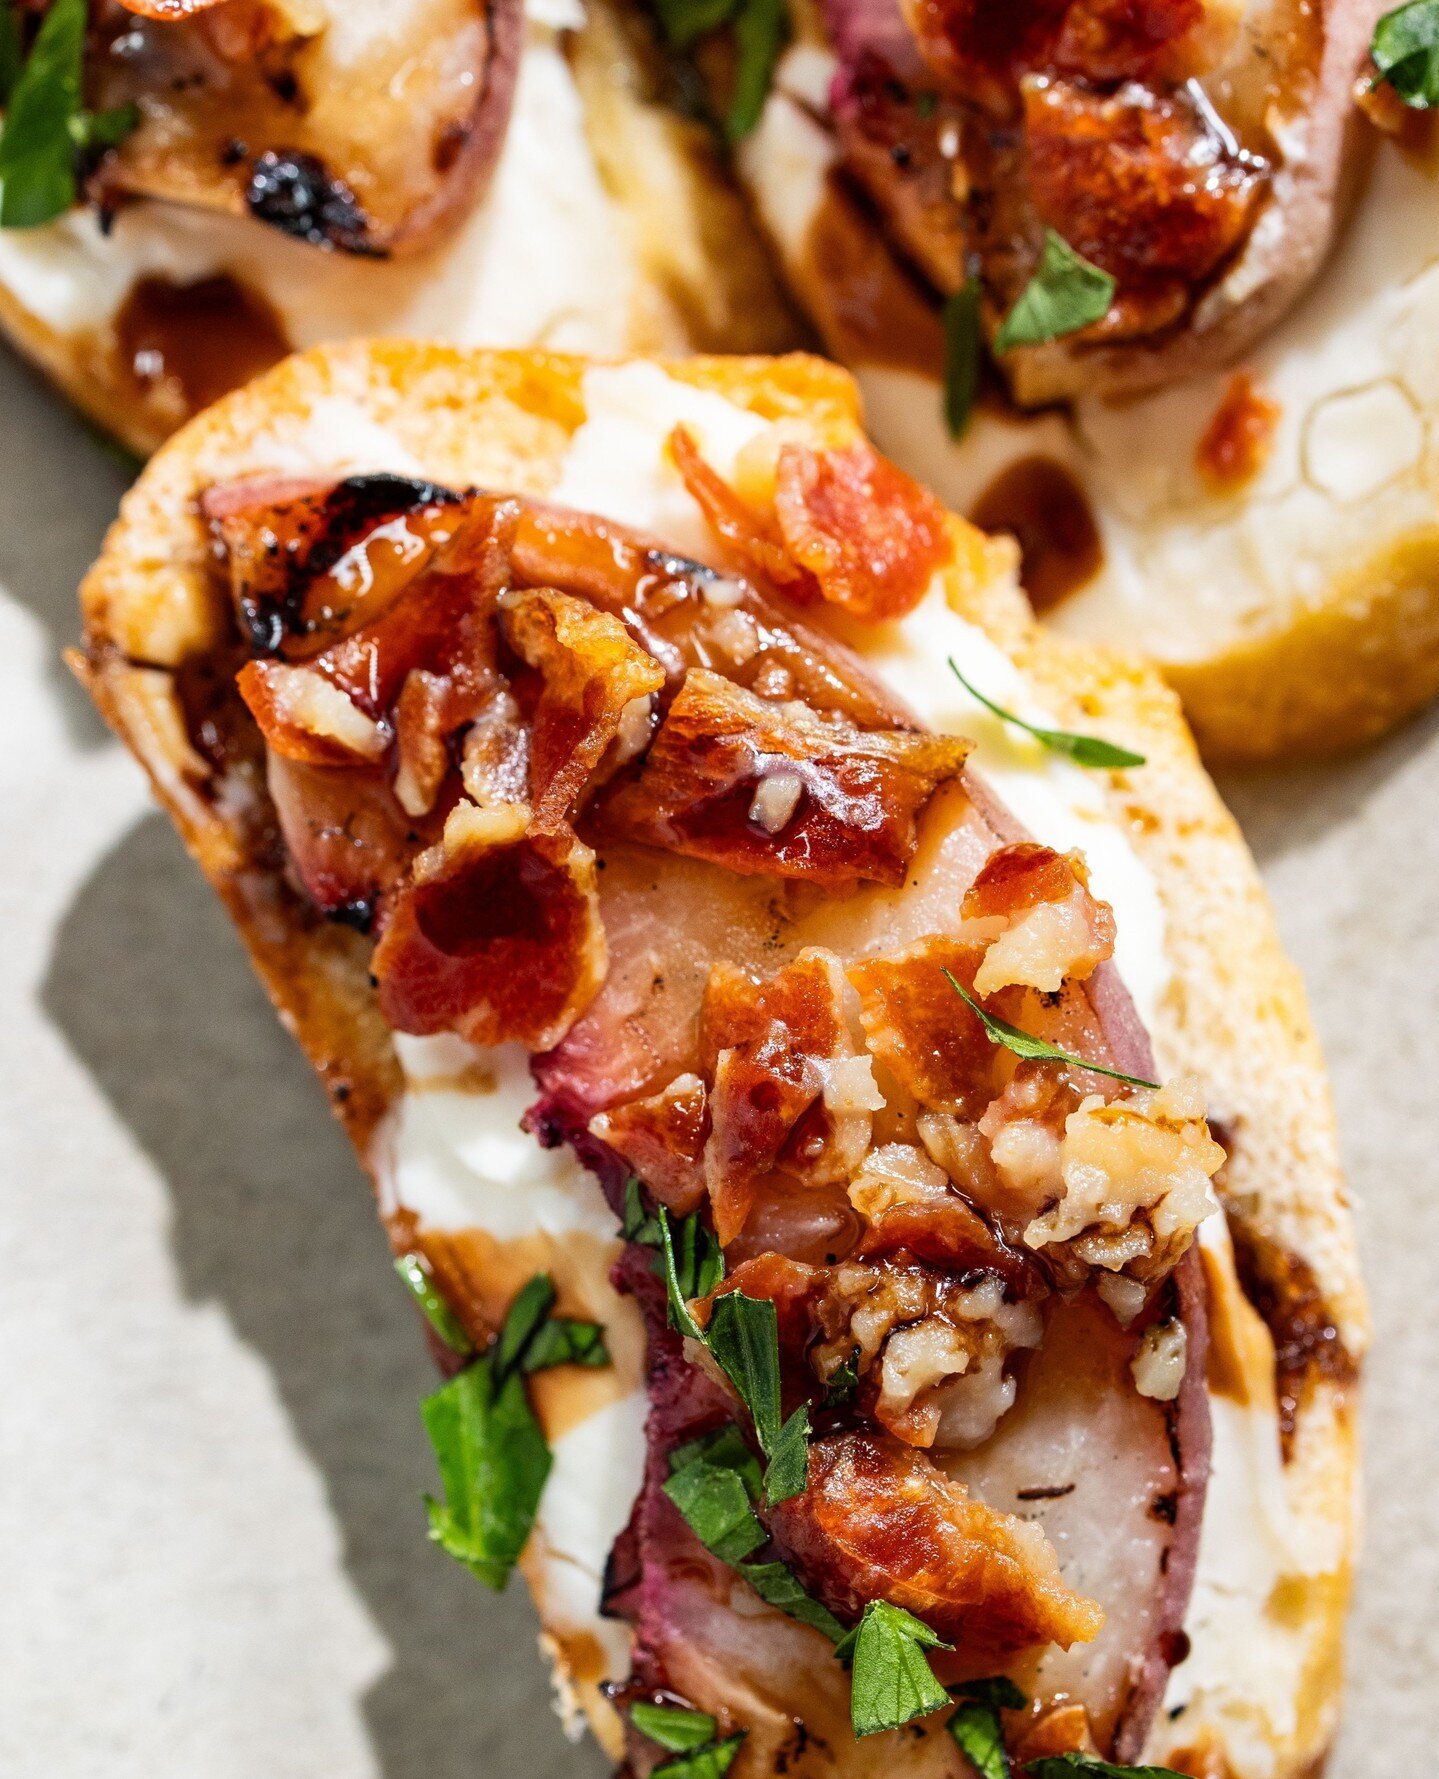 Hors D'oeuvres of the Day: Bacon &amp; Peaches crostini with Zesty Greek Yogurt &amp; Walnuts ✨